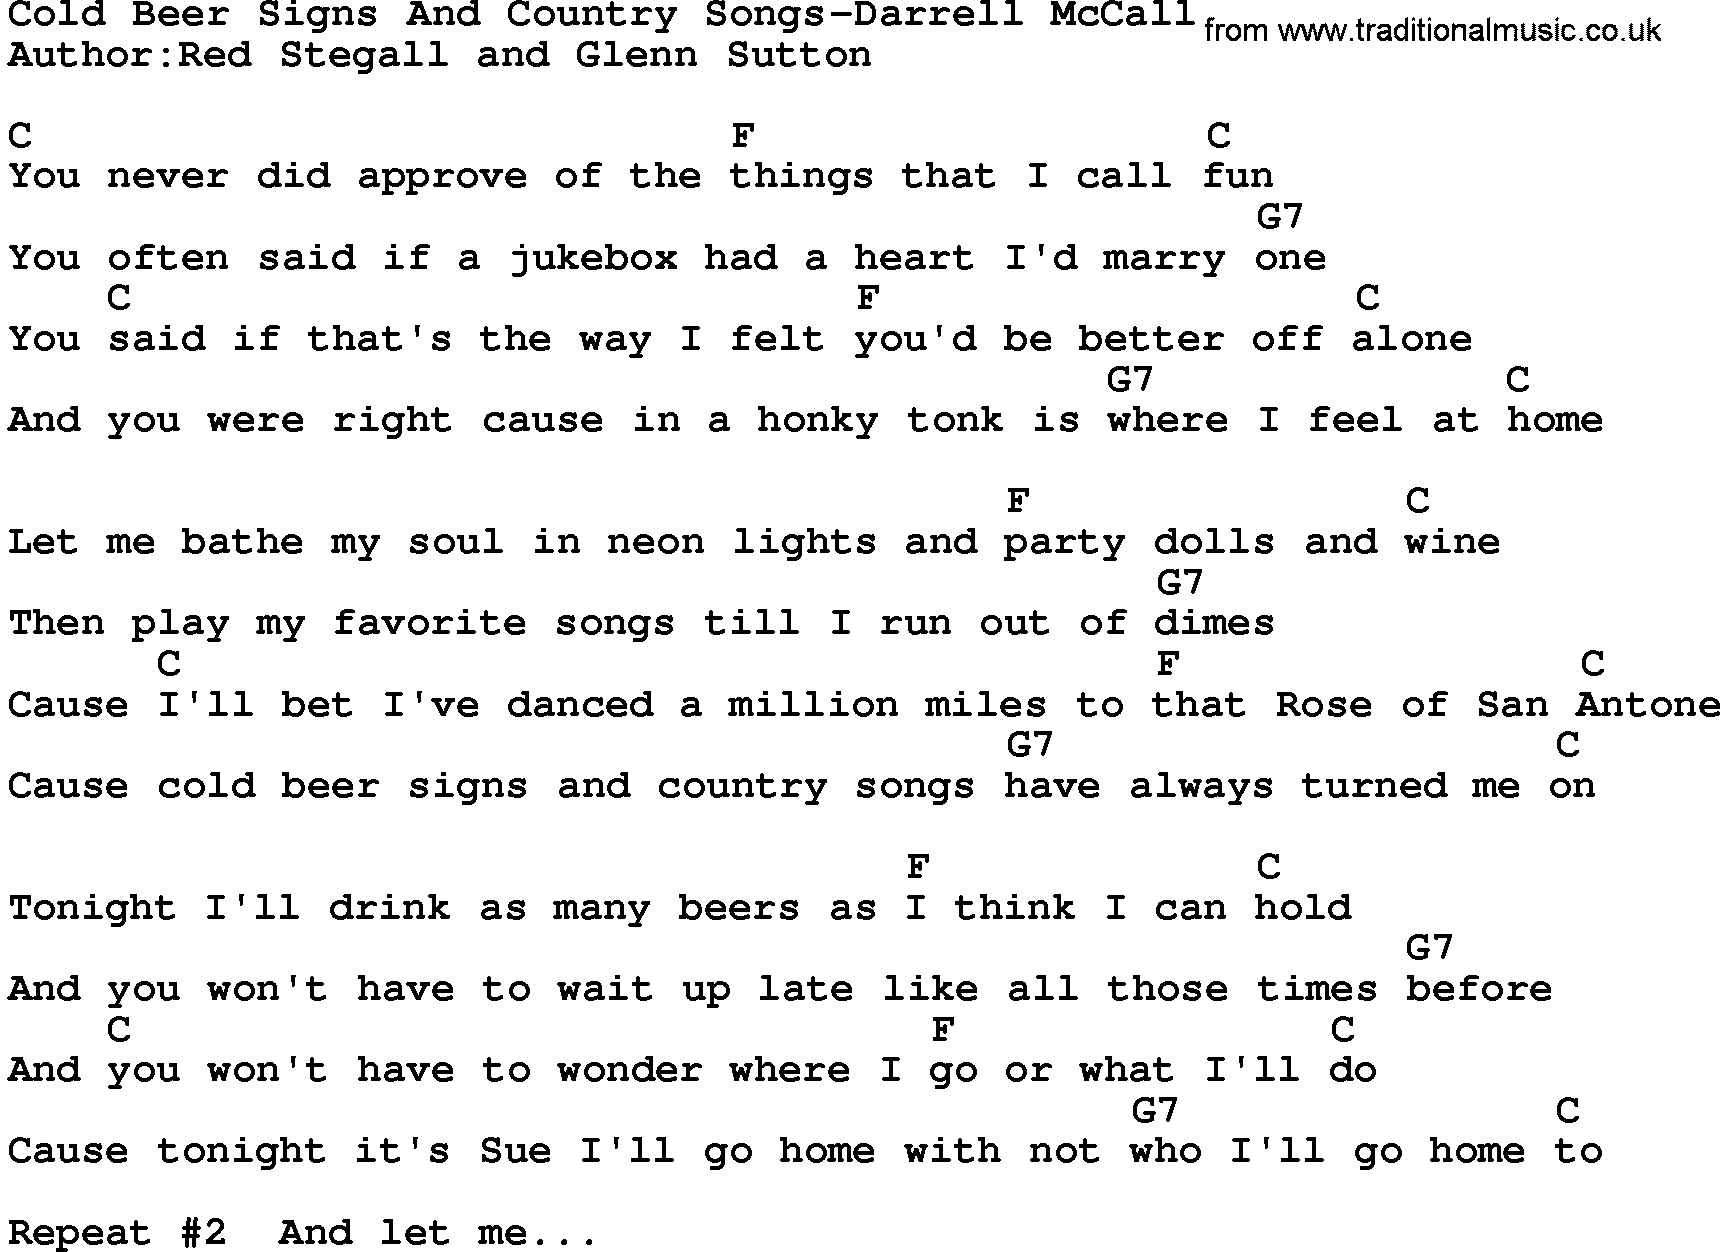 Country music song: Cold Beer Signs And Country Songs-Darrell Mccall lyrics and chords